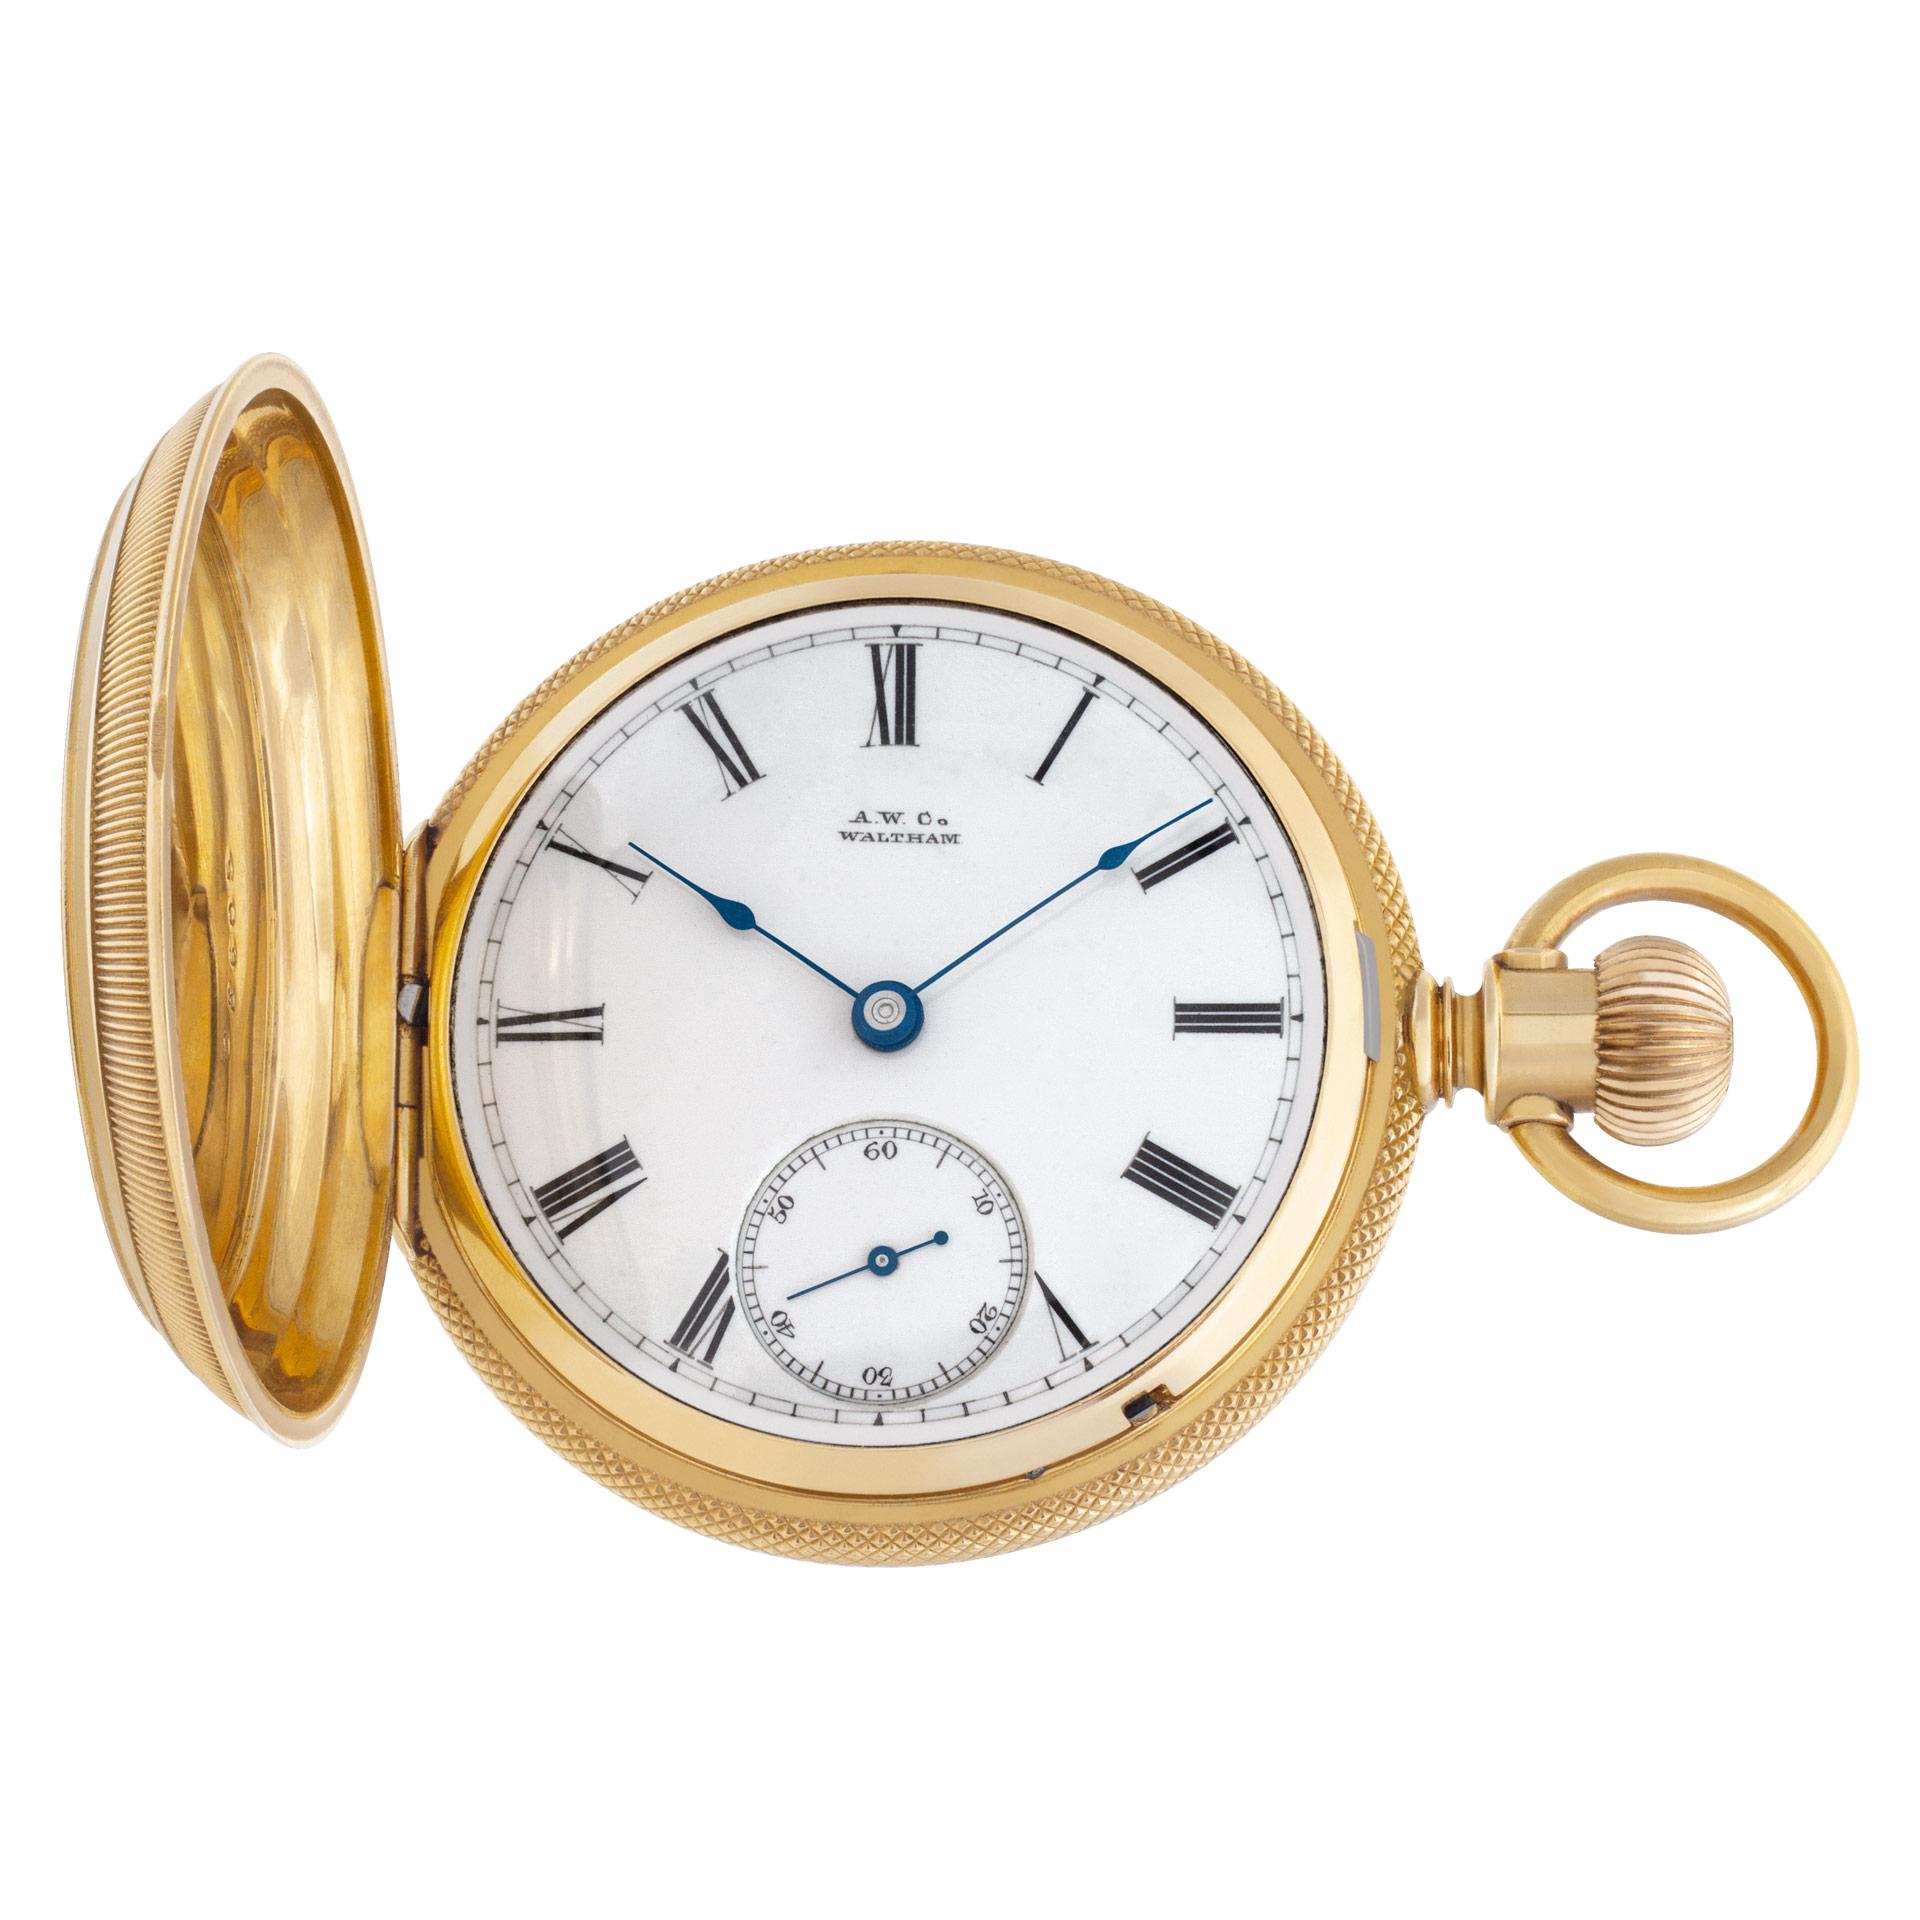 Waltham Hunter Case Pocket watch  in 14k. Manual w/ subseconds. 53.3 mm case size. Ref 1,472009. Fine Pre-owned Waltham Watch.   Certified preowned Vintage Waltham Hunt Case 1,472009 watch is made out of yellow gold. This Waltham watch has a 53  x